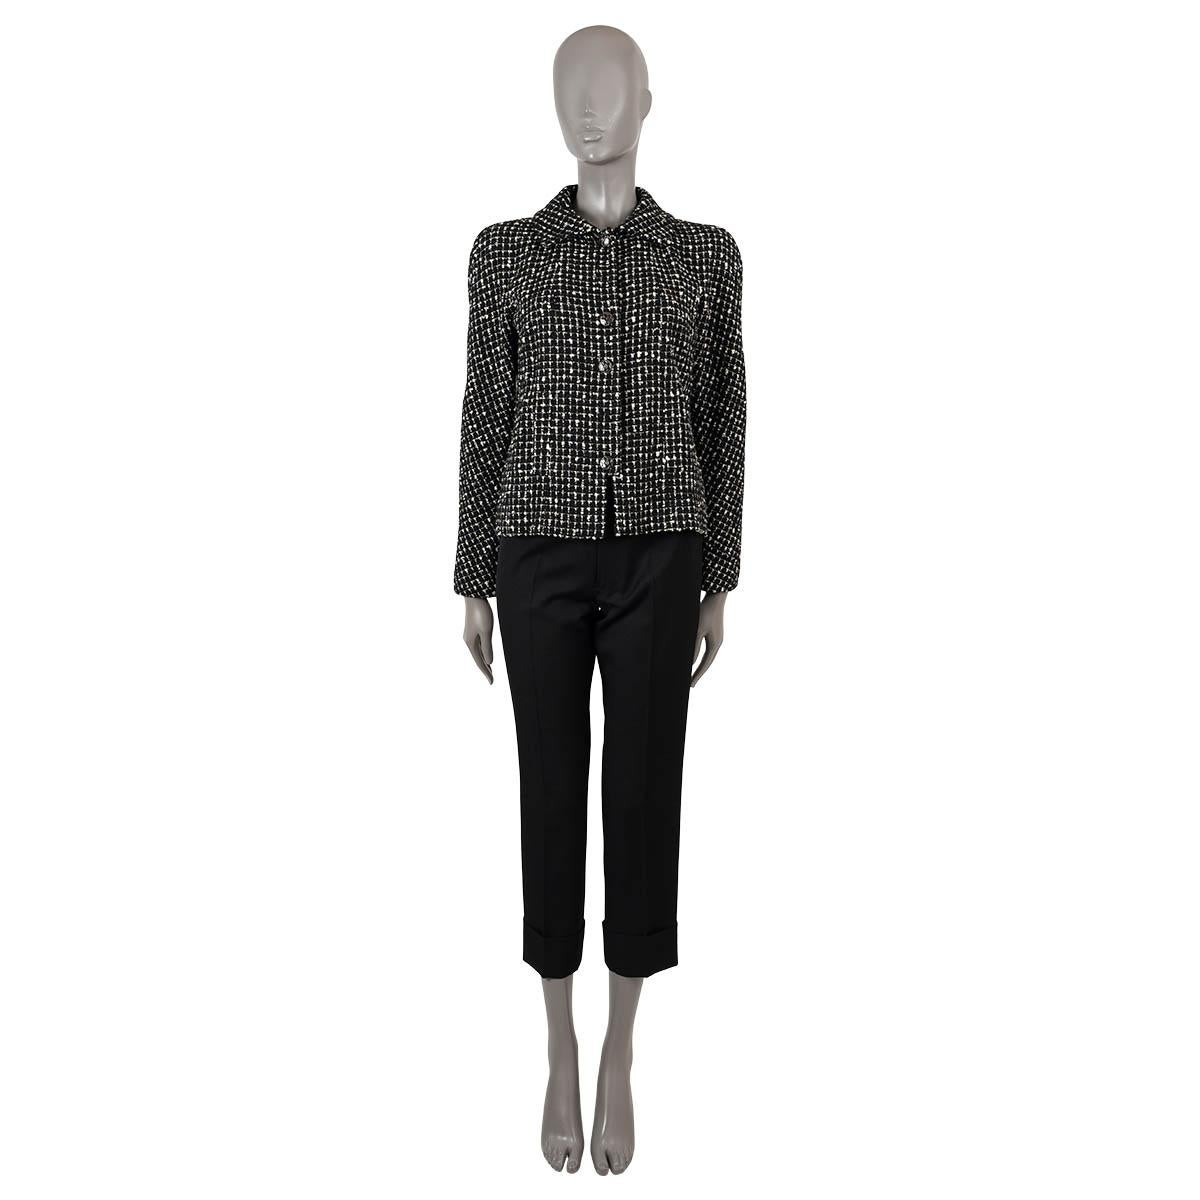 100% authentic Chanel tweed jacket in black and white wool (68%), polyester (21%) and nylon (11%). Features a pointed collar and two slant pockets at the waist. Closes with black enamel CC buttons on the front and is lined in silk (100%). Has been